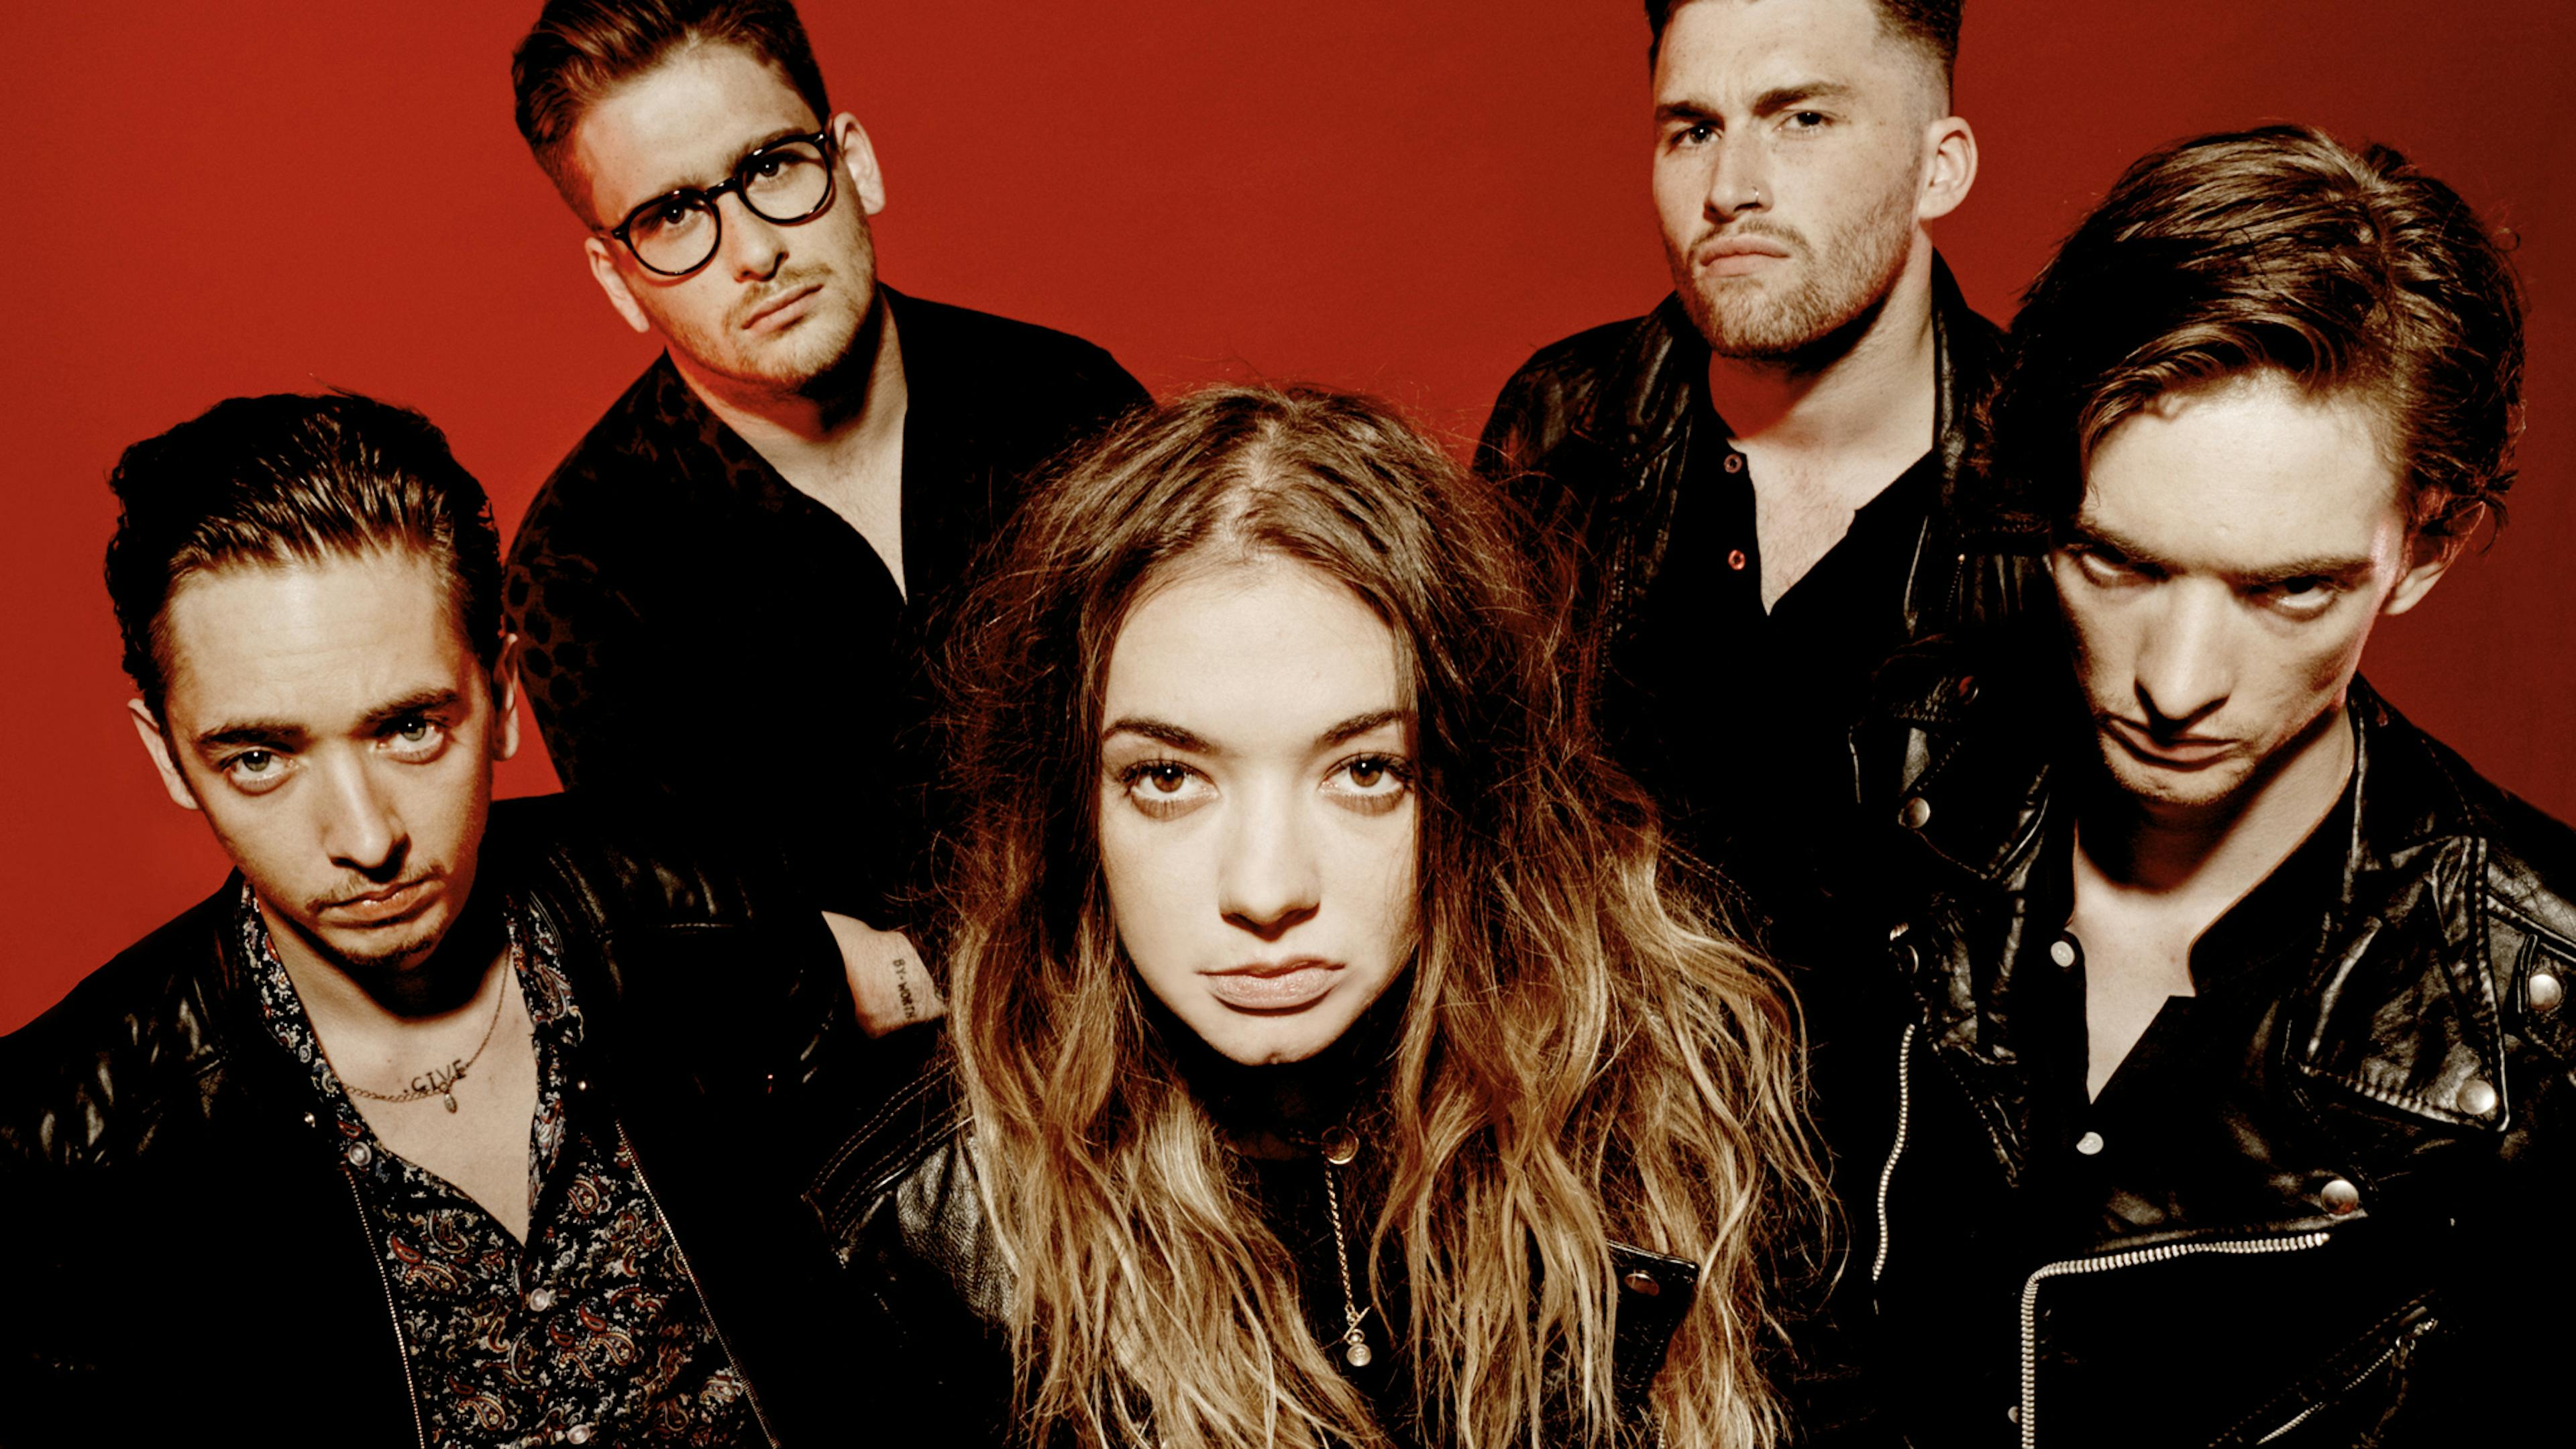 “See you all soon”: Marmozets have signed a new record deal